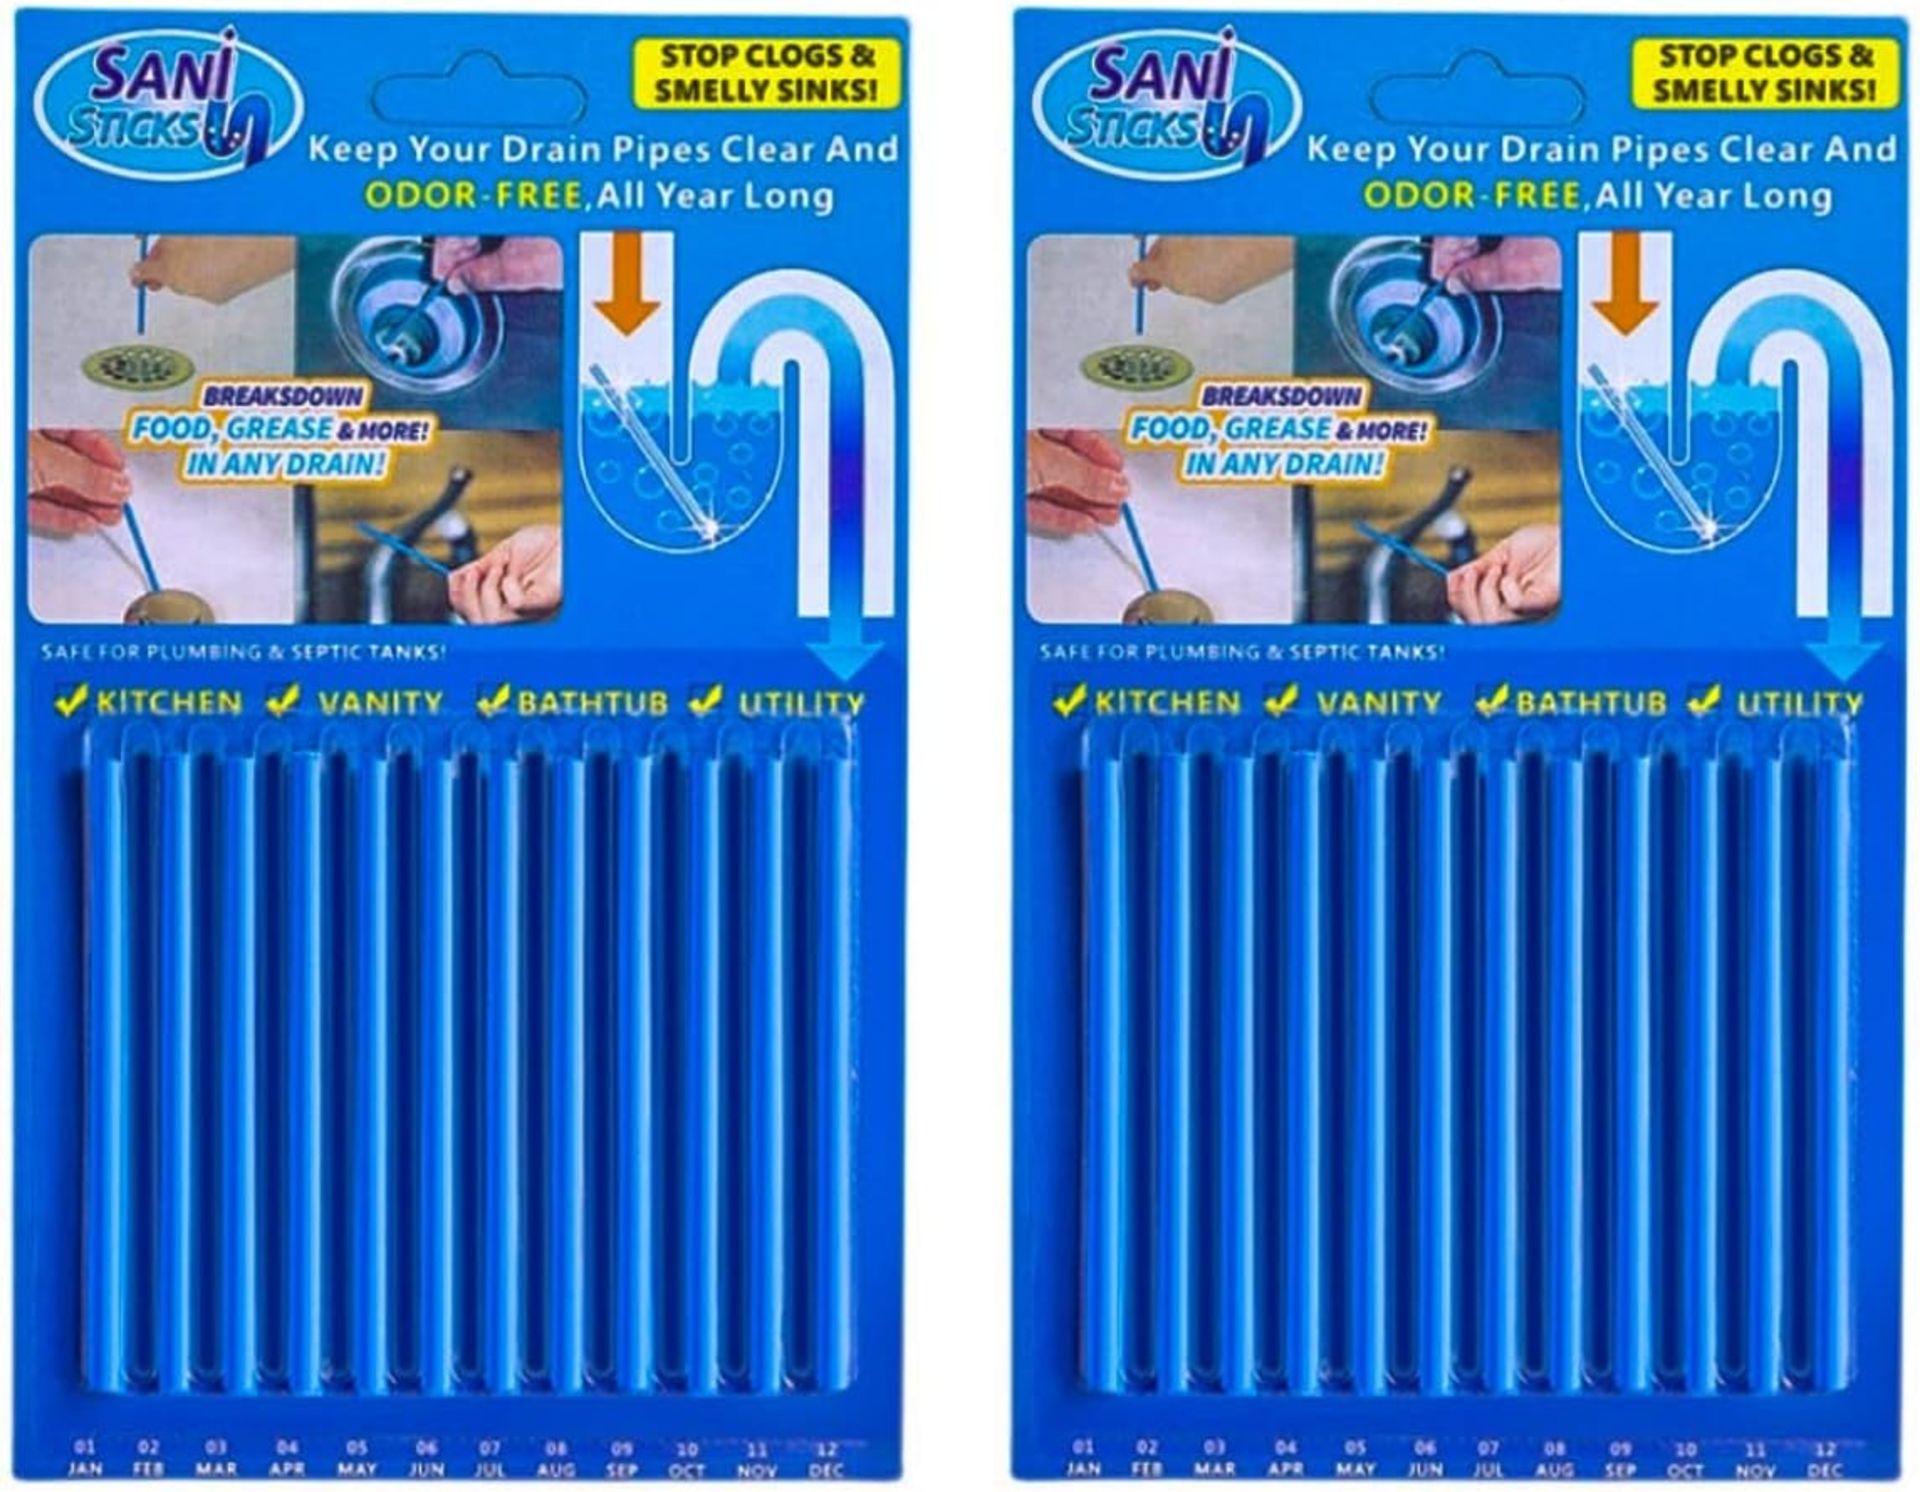 TRADE LOT TO CONTAIN 200x BRAND NEW Packs Of 12 Drain Cleaner Sticks - 2 PACKS. RRP £4.99 EACH.